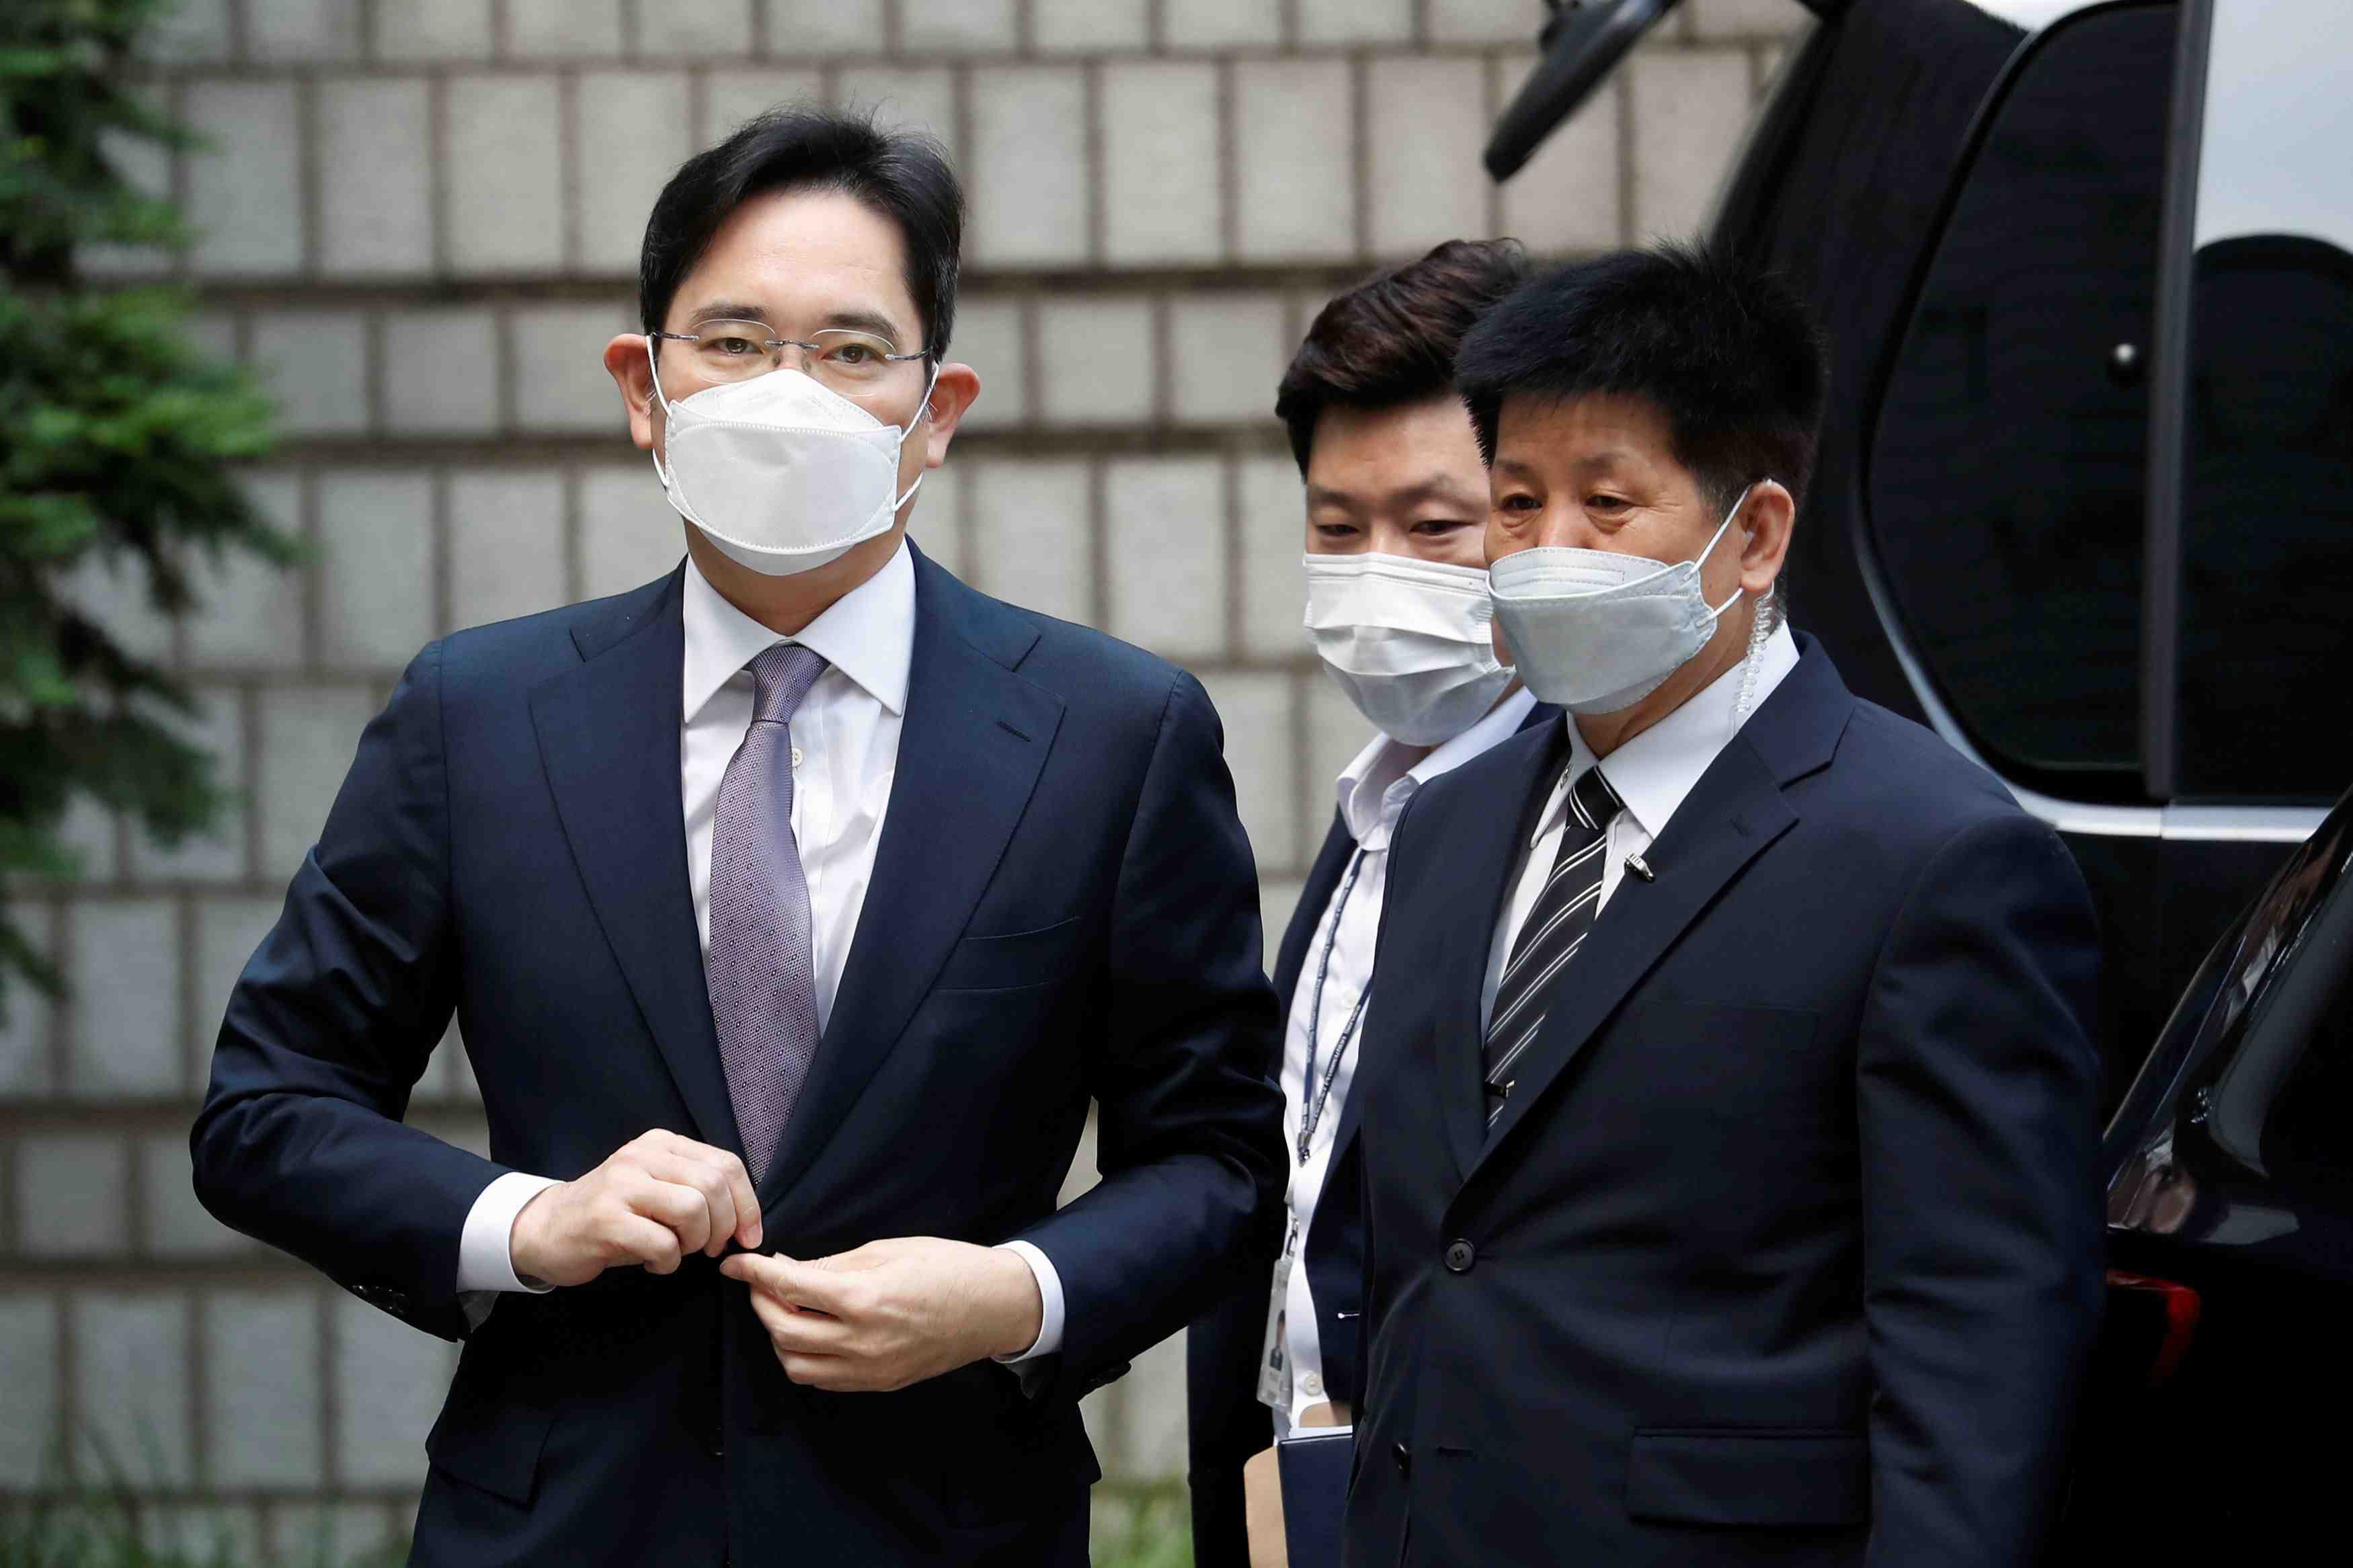 FILE PHOTO: Samsung Group heir Jay Y. Lee arrives for a court hearing to review a detention warrant request against him at the Seoul Central District Court in Seoul